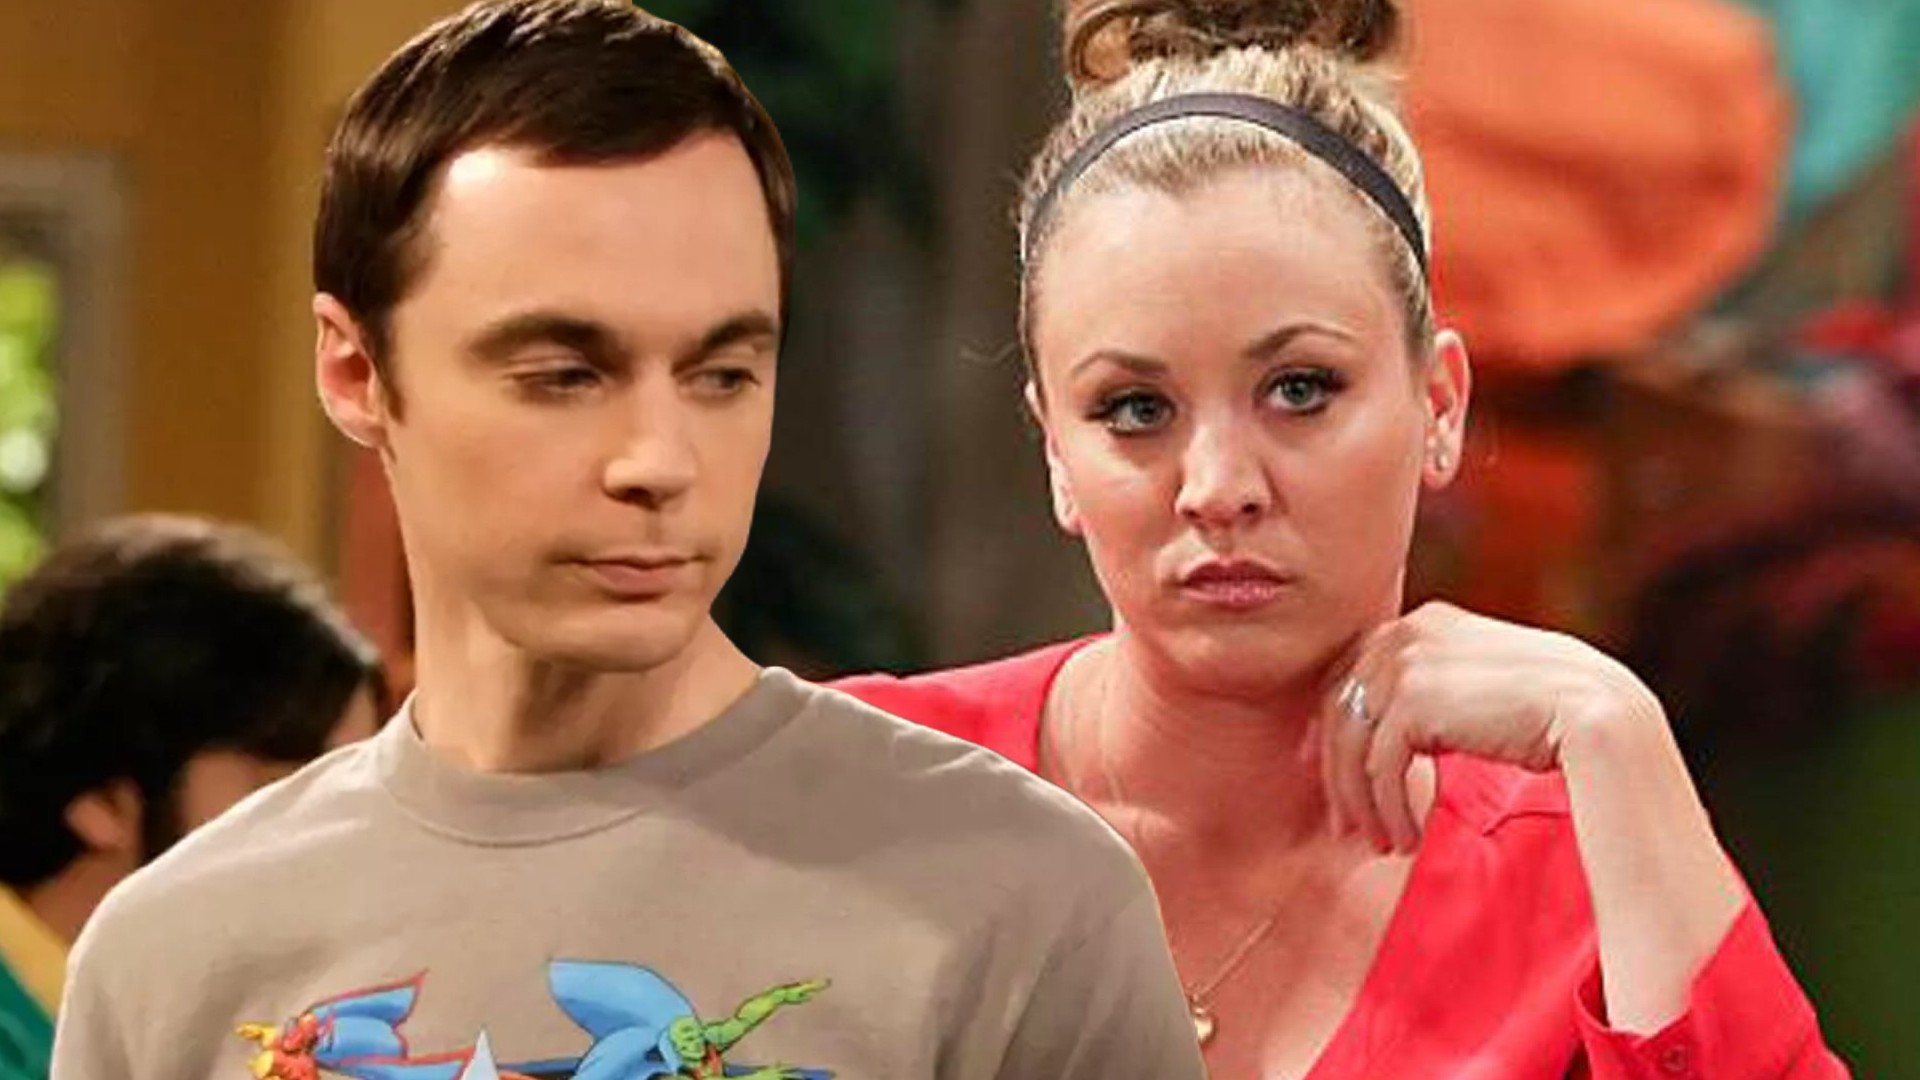 Behind the Scenes TBBT Drama That Led to Cuoco Icing Parsons on Set